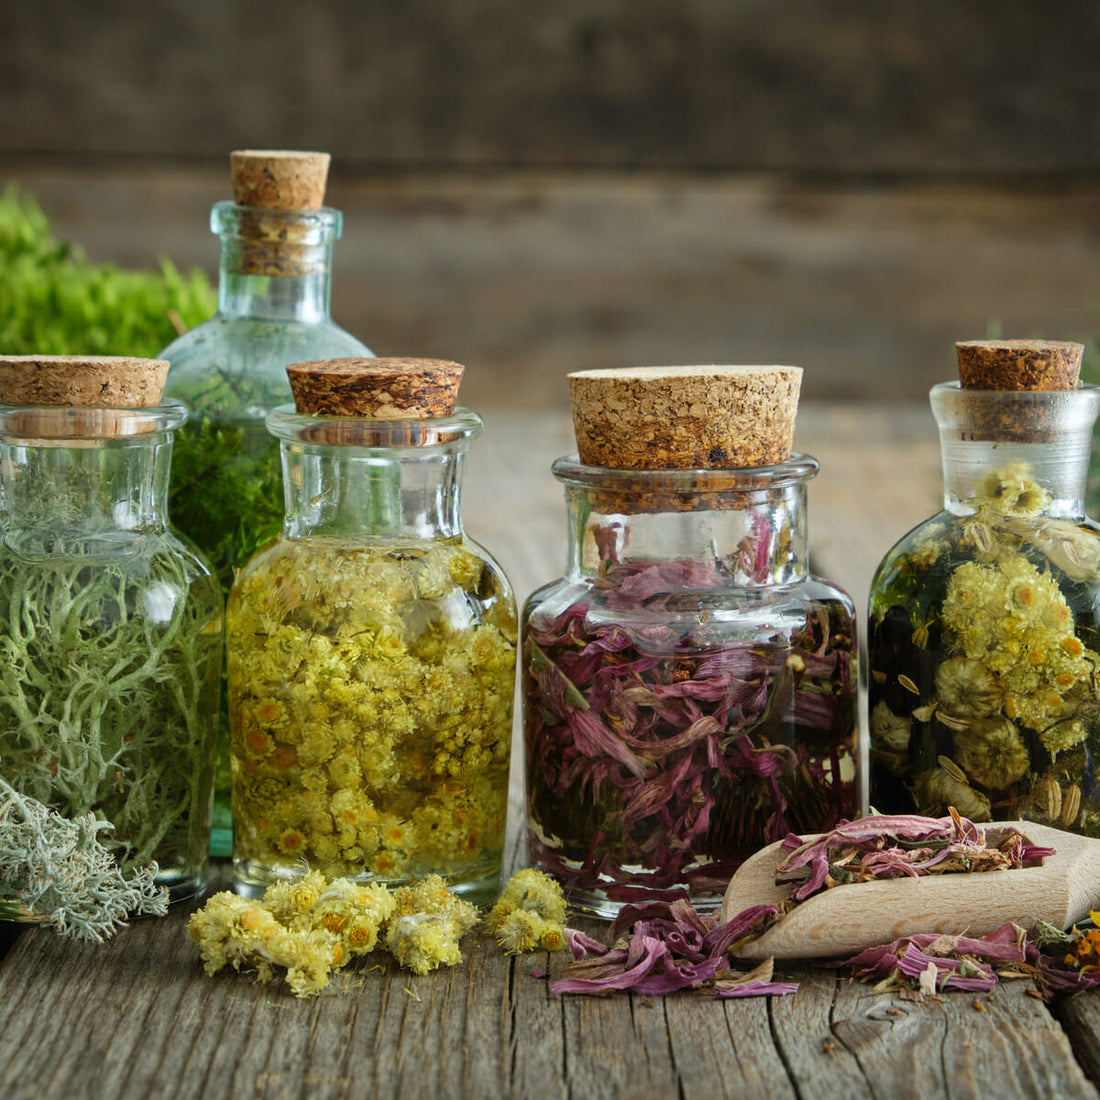 5 Different Ways to Use Your Harvested Herbs